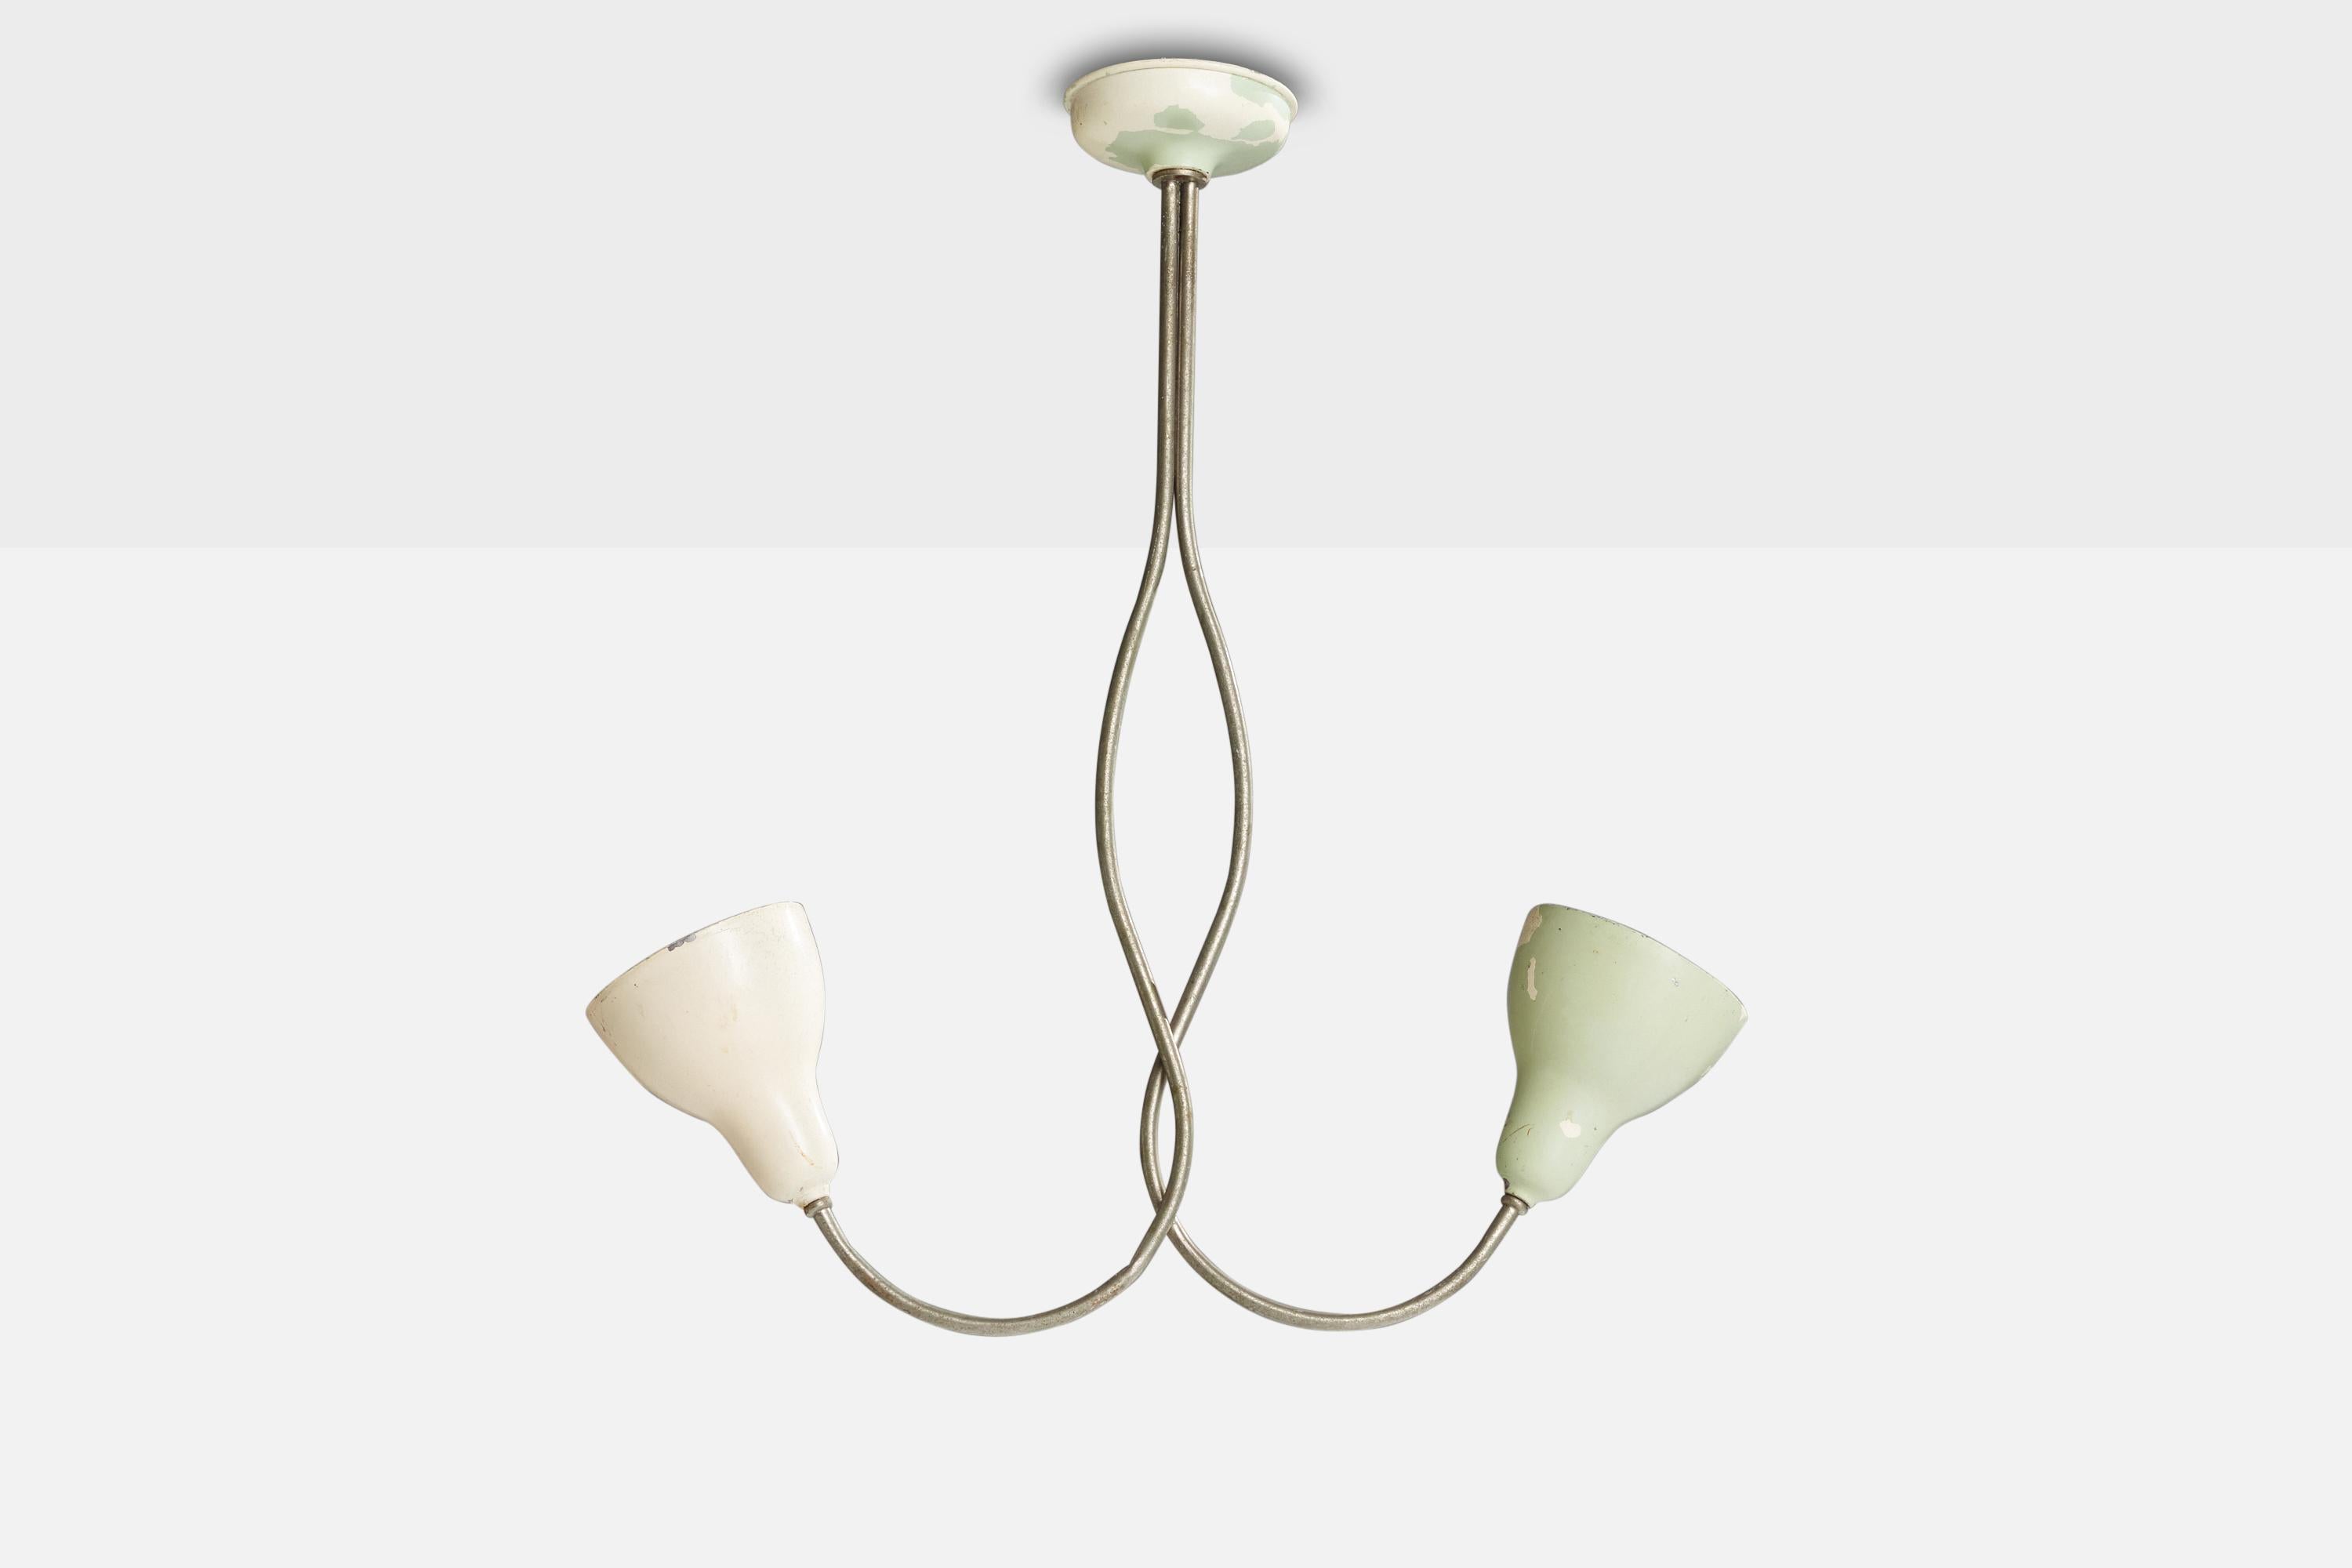 A white and green painted metal chandelier designed and produced in Italy, 1950s.

Dimensions of canopy (inches): 2” H x 5”  Diameter
Socket takes standard E-26 bulbs. 2 sockets. There is no maximum wattage stated on the fixture. All lighting will